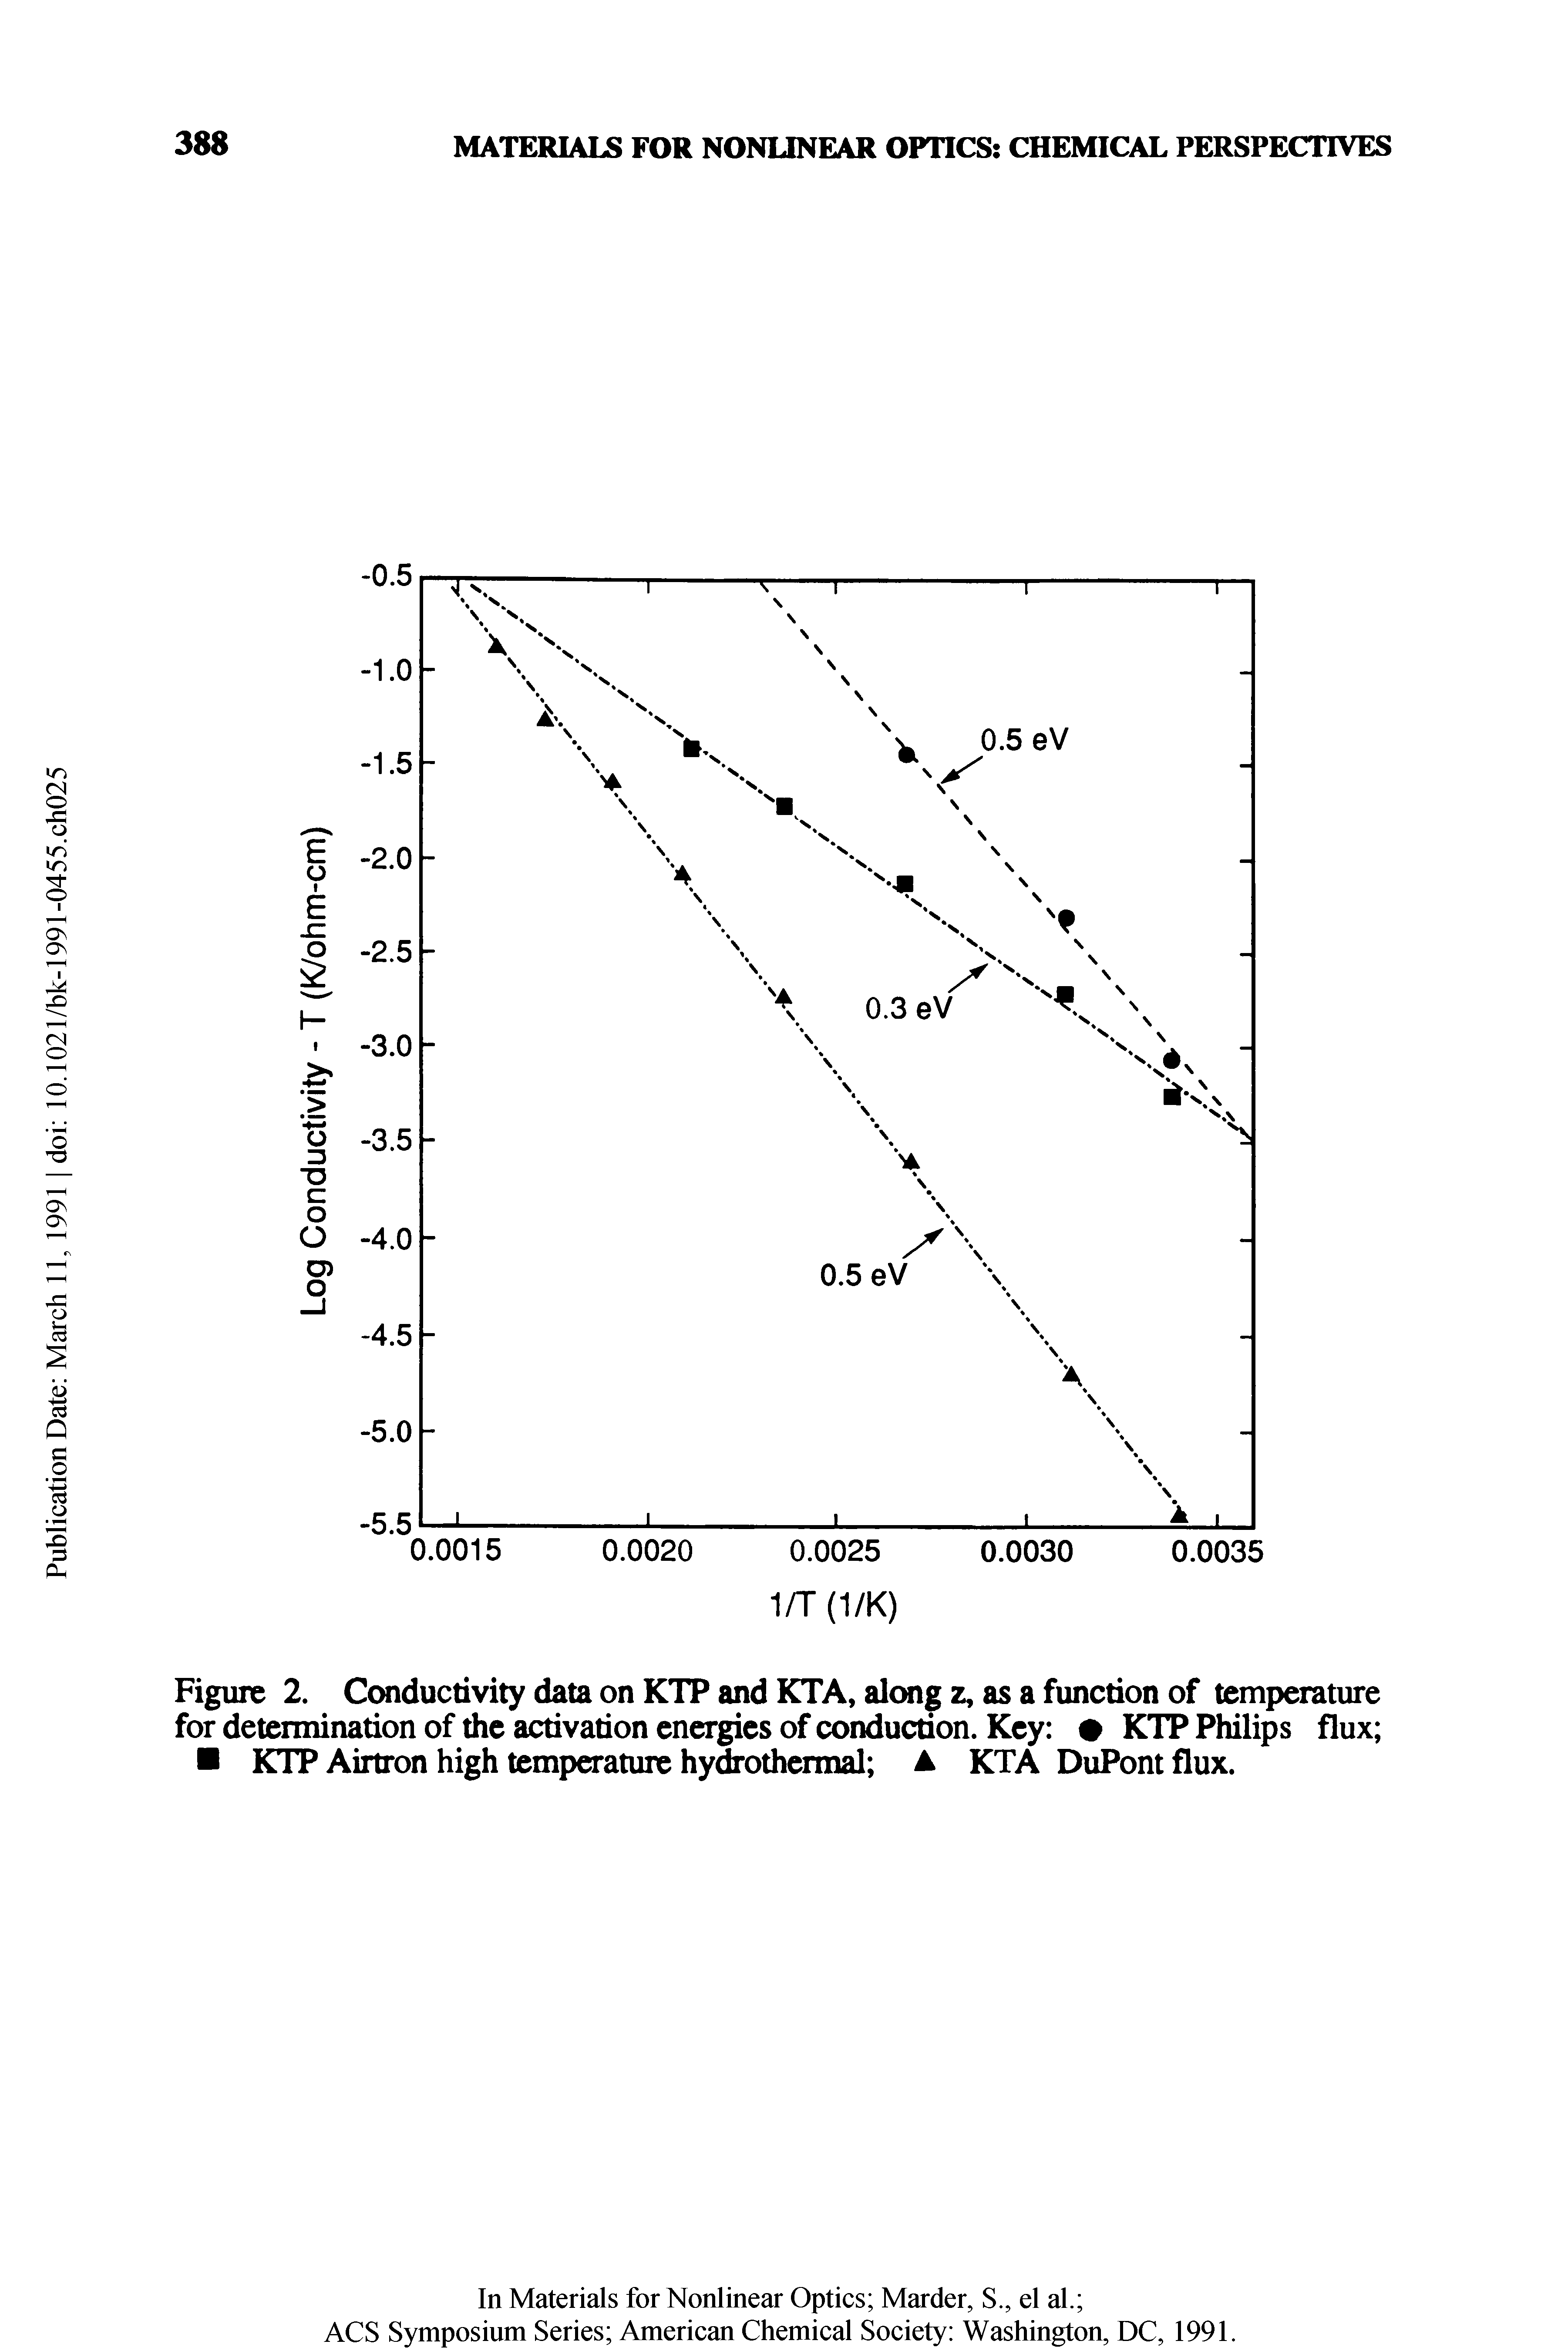 Figure 2. Conductivity data on KTP and KTA, along z, as a function of temperature for determination of the activation energies of conduction. Key KTP Philips flux KTP Airtron high temperature hydrothermal A KTA DuPont flux.